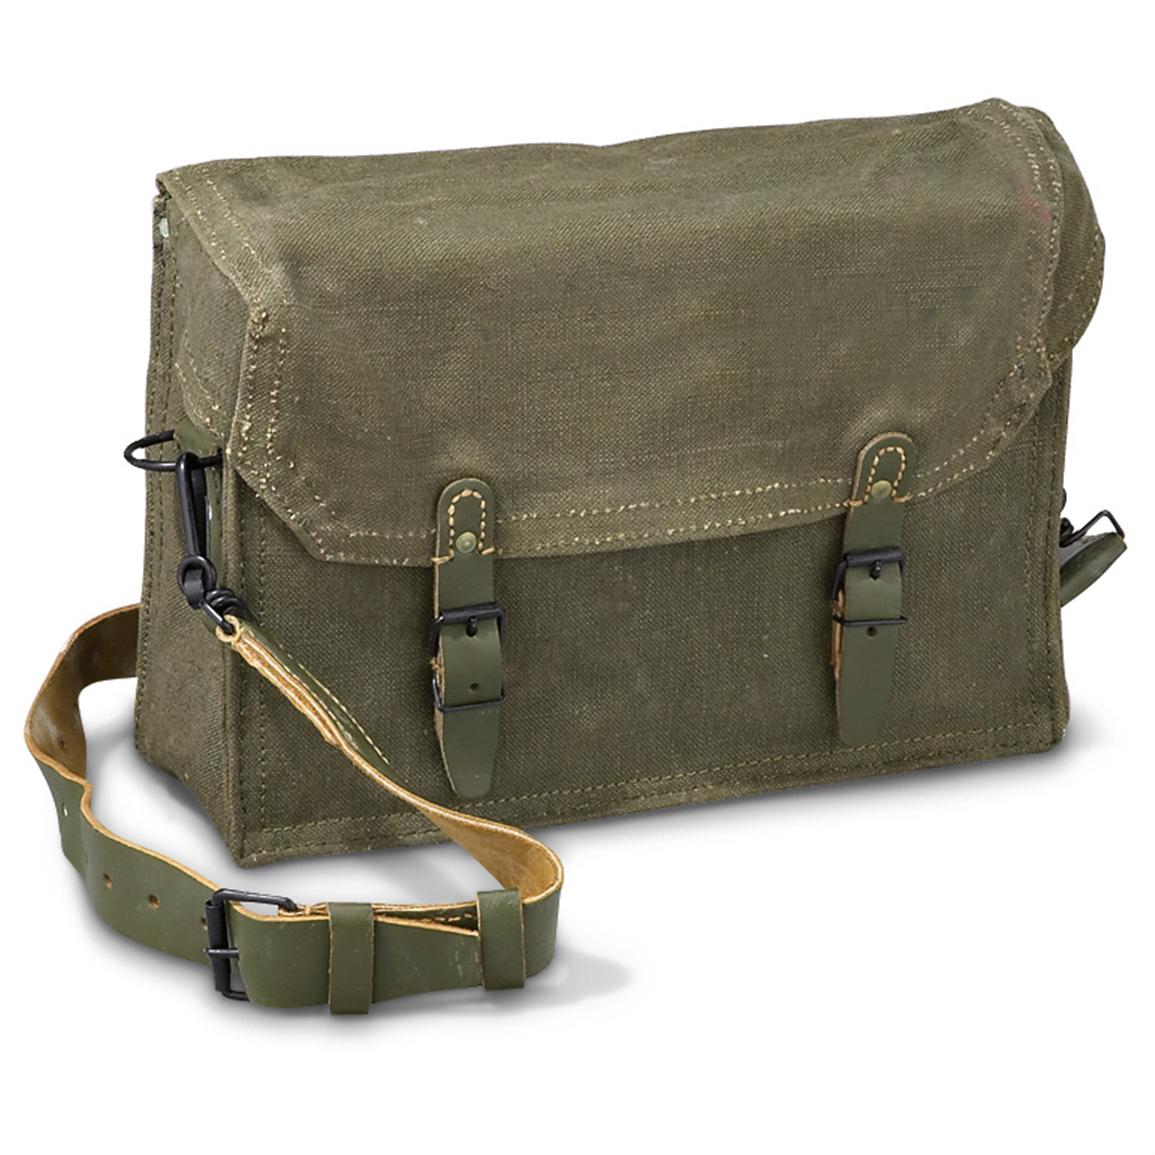 Used French Military Shoulder Bag, Olive Drab - 135894, Military Messenger Bags at Sportsman&#39;s Guide